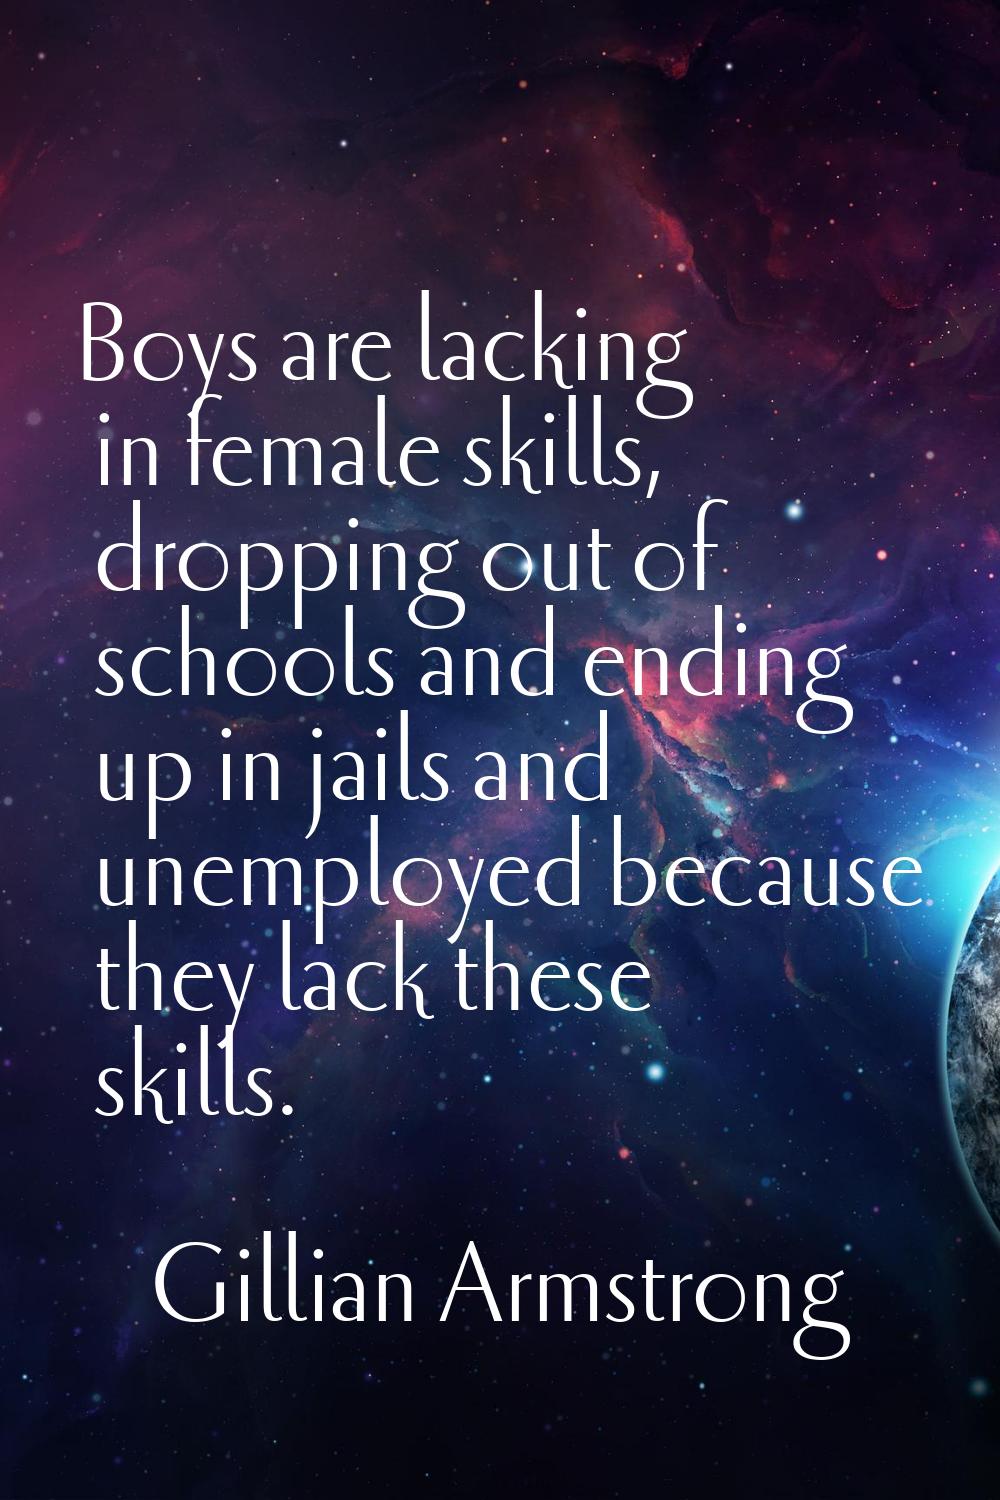 Boys are lacking in female skills, dropping out of schools and ending up in jails and unemployed be